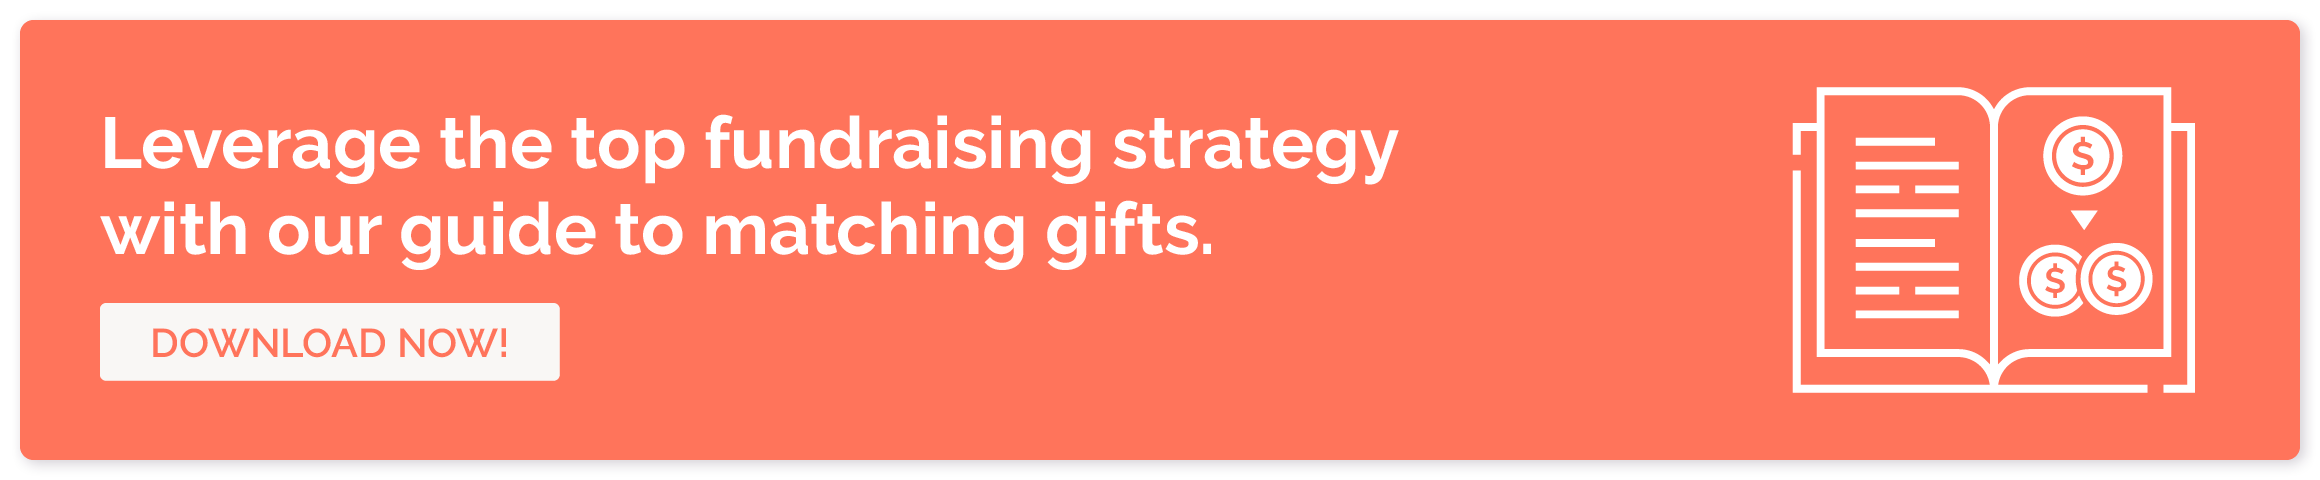 Leverage the top fundraising strategy with our guide to matching gifts. Download now!